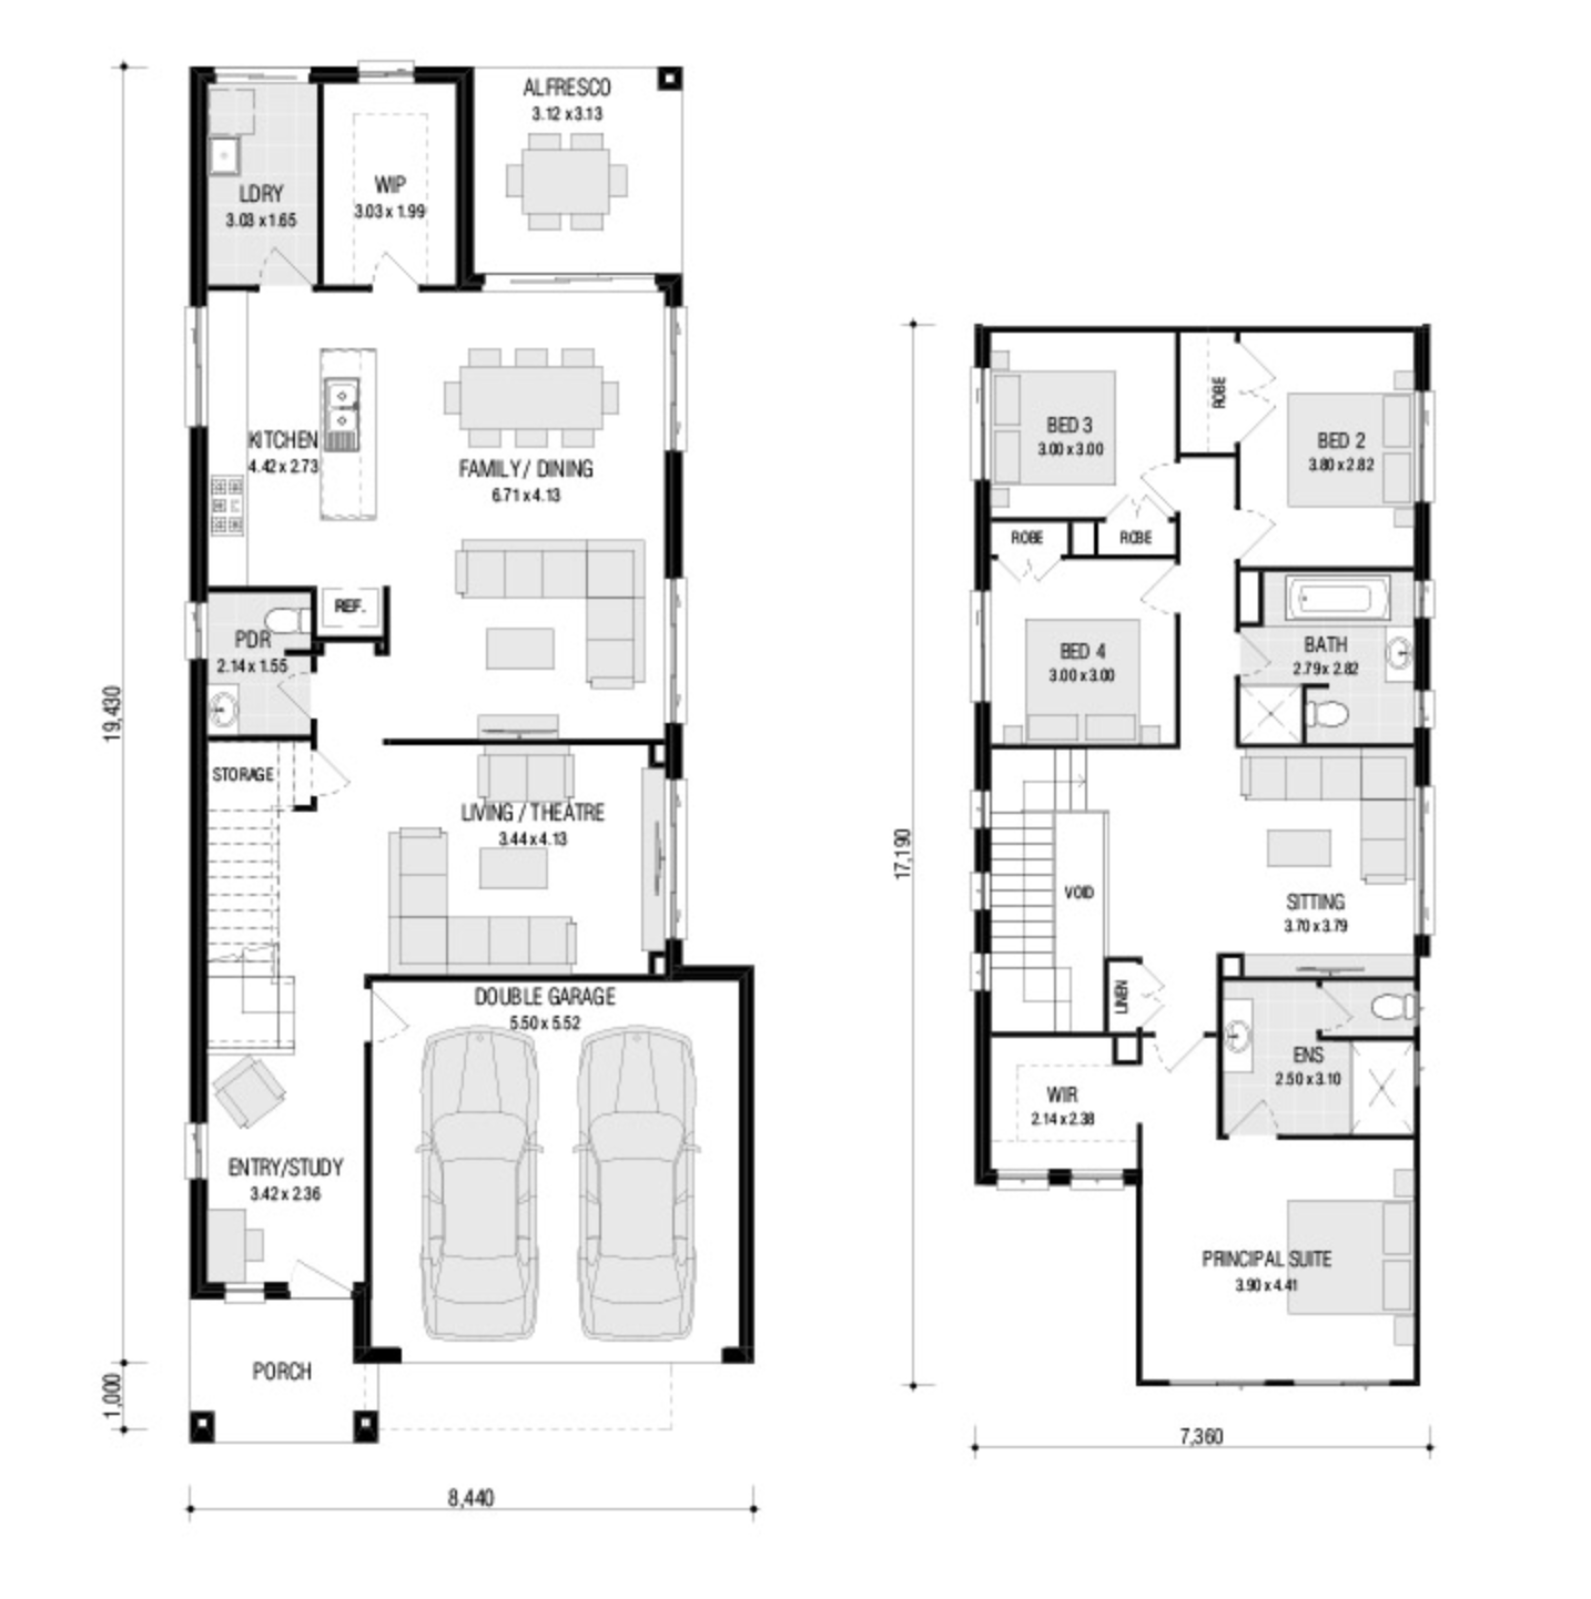 Floor plan review and ideas